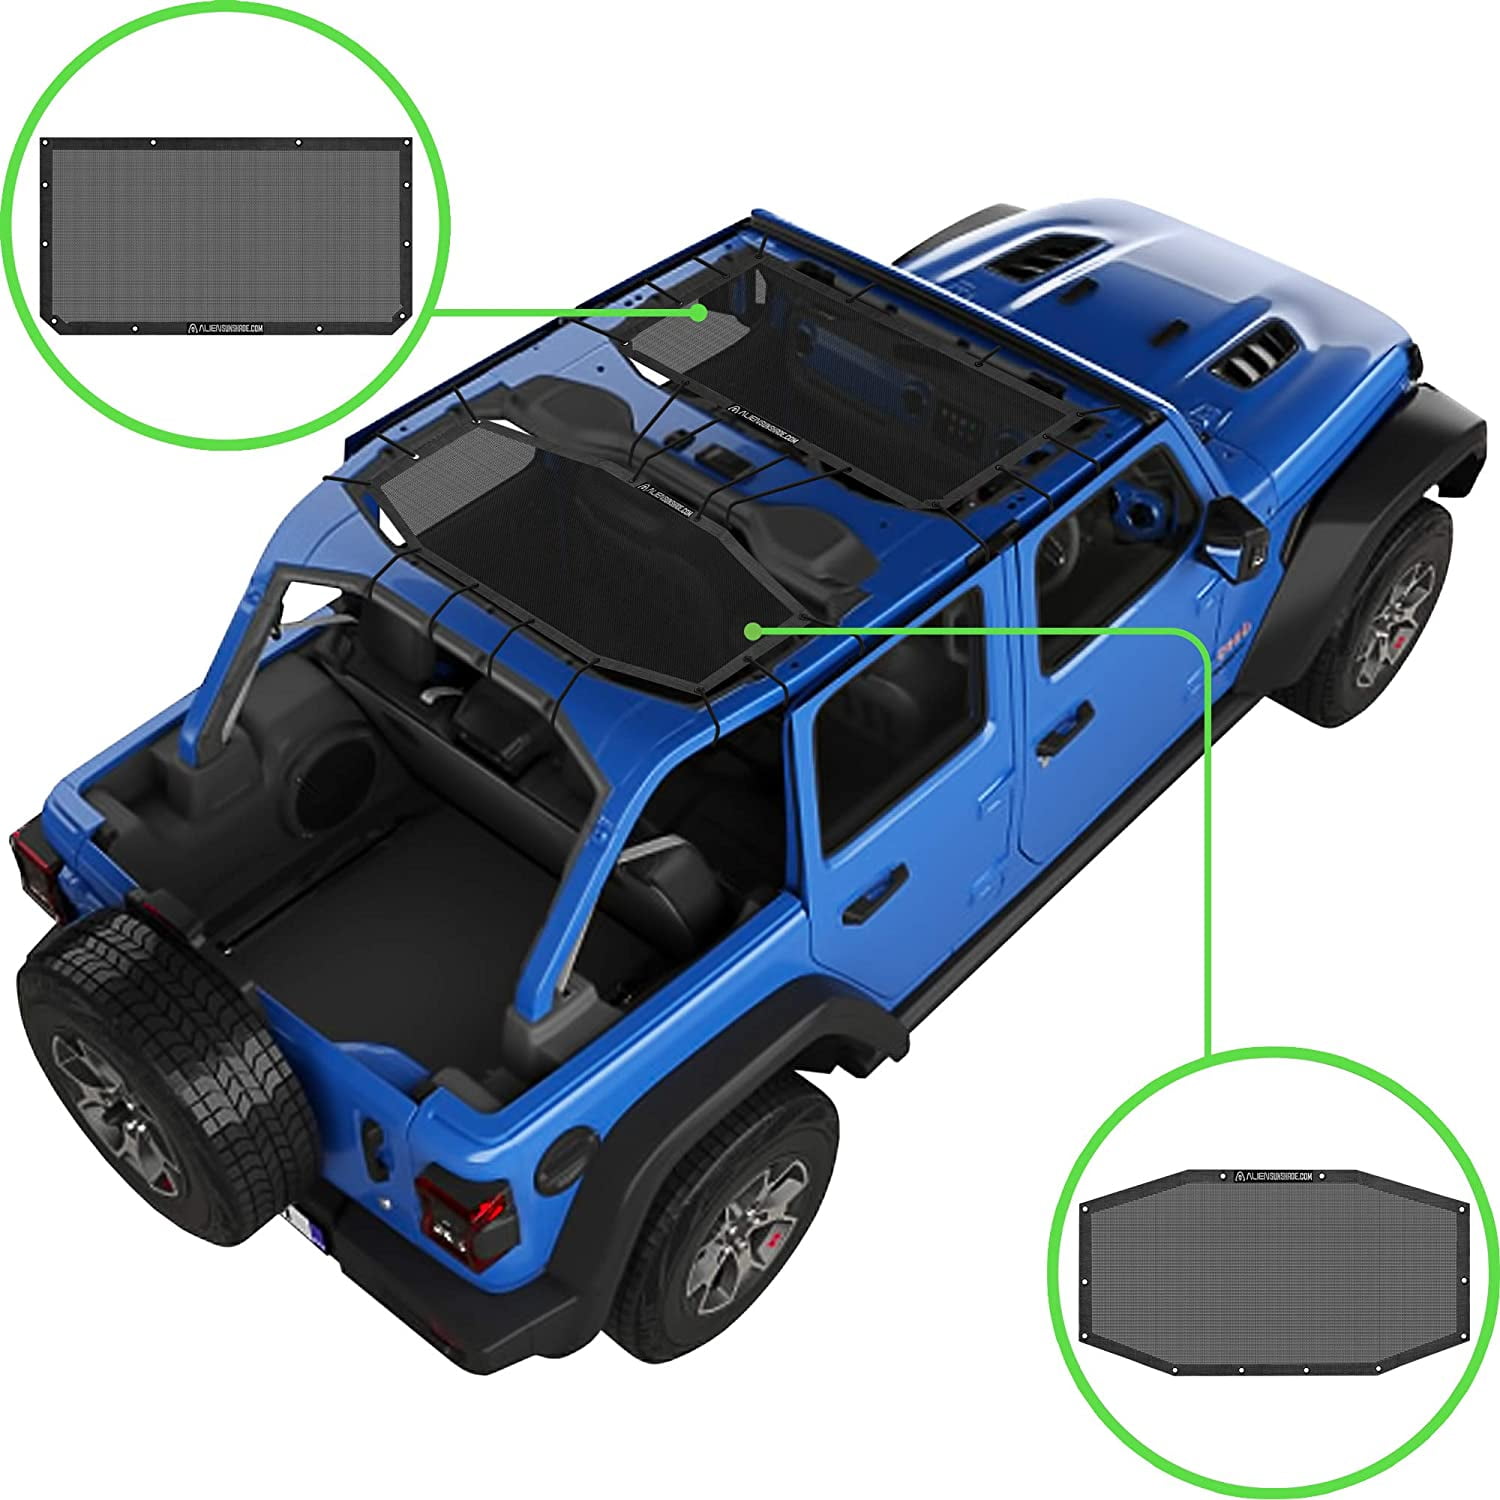 ALIEN SUNSHADE Jeep Wrangler Mesh Shade Top Cover with 10 Year Warranty Provides UV Protection for Your LJ Unlimited Tan 2003-2006 